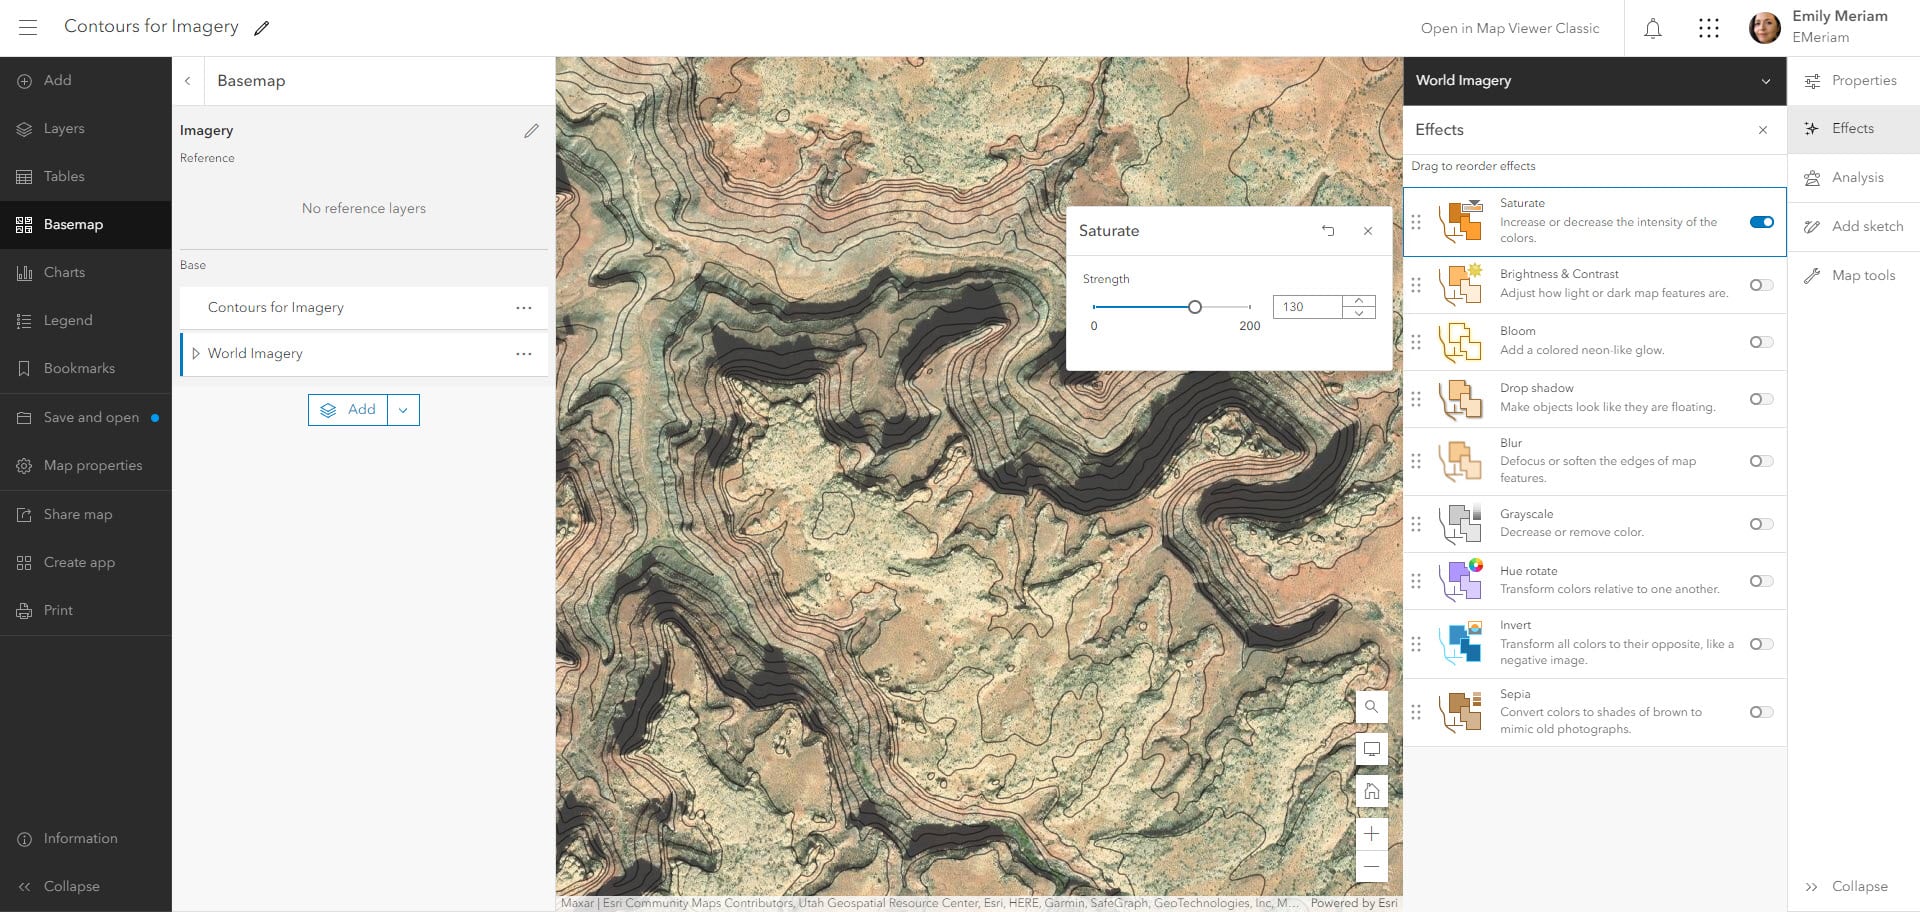 Webmap showing where to find the Layer Effects to saturate the World Imagery.